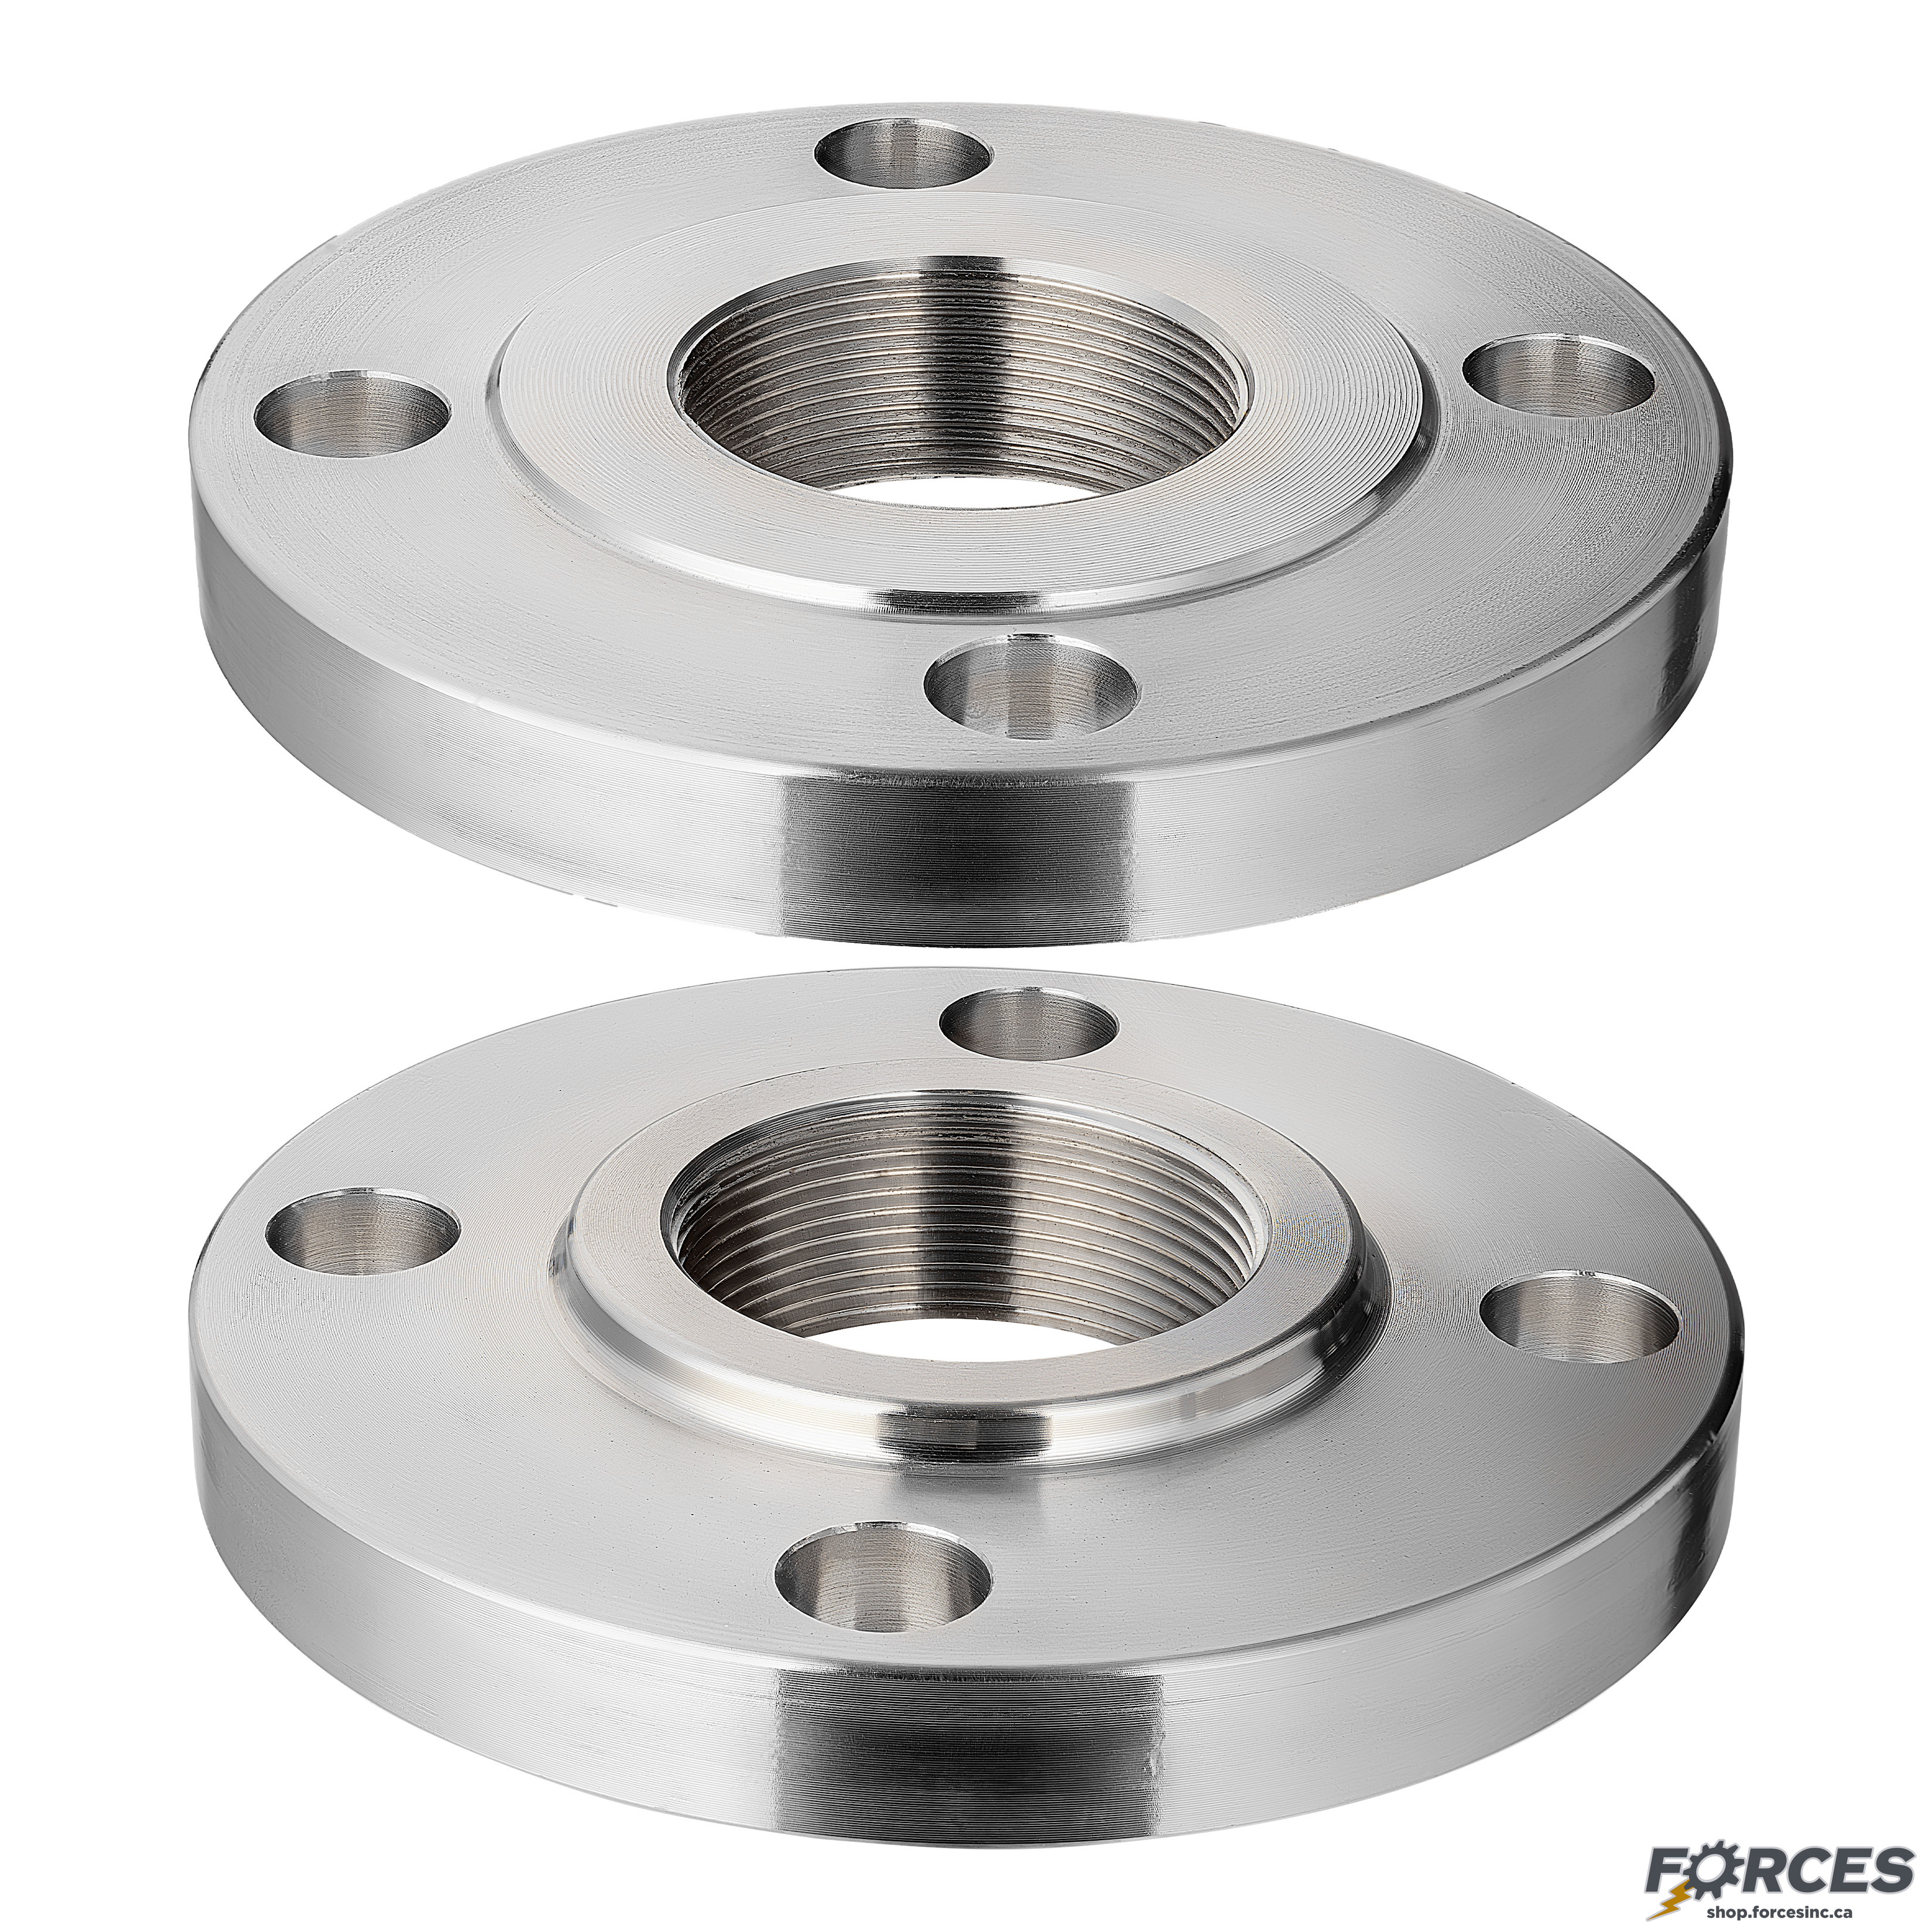 3" Threaded Flange NPT Class #150 - Stainless Steel 316 - Forces Inc